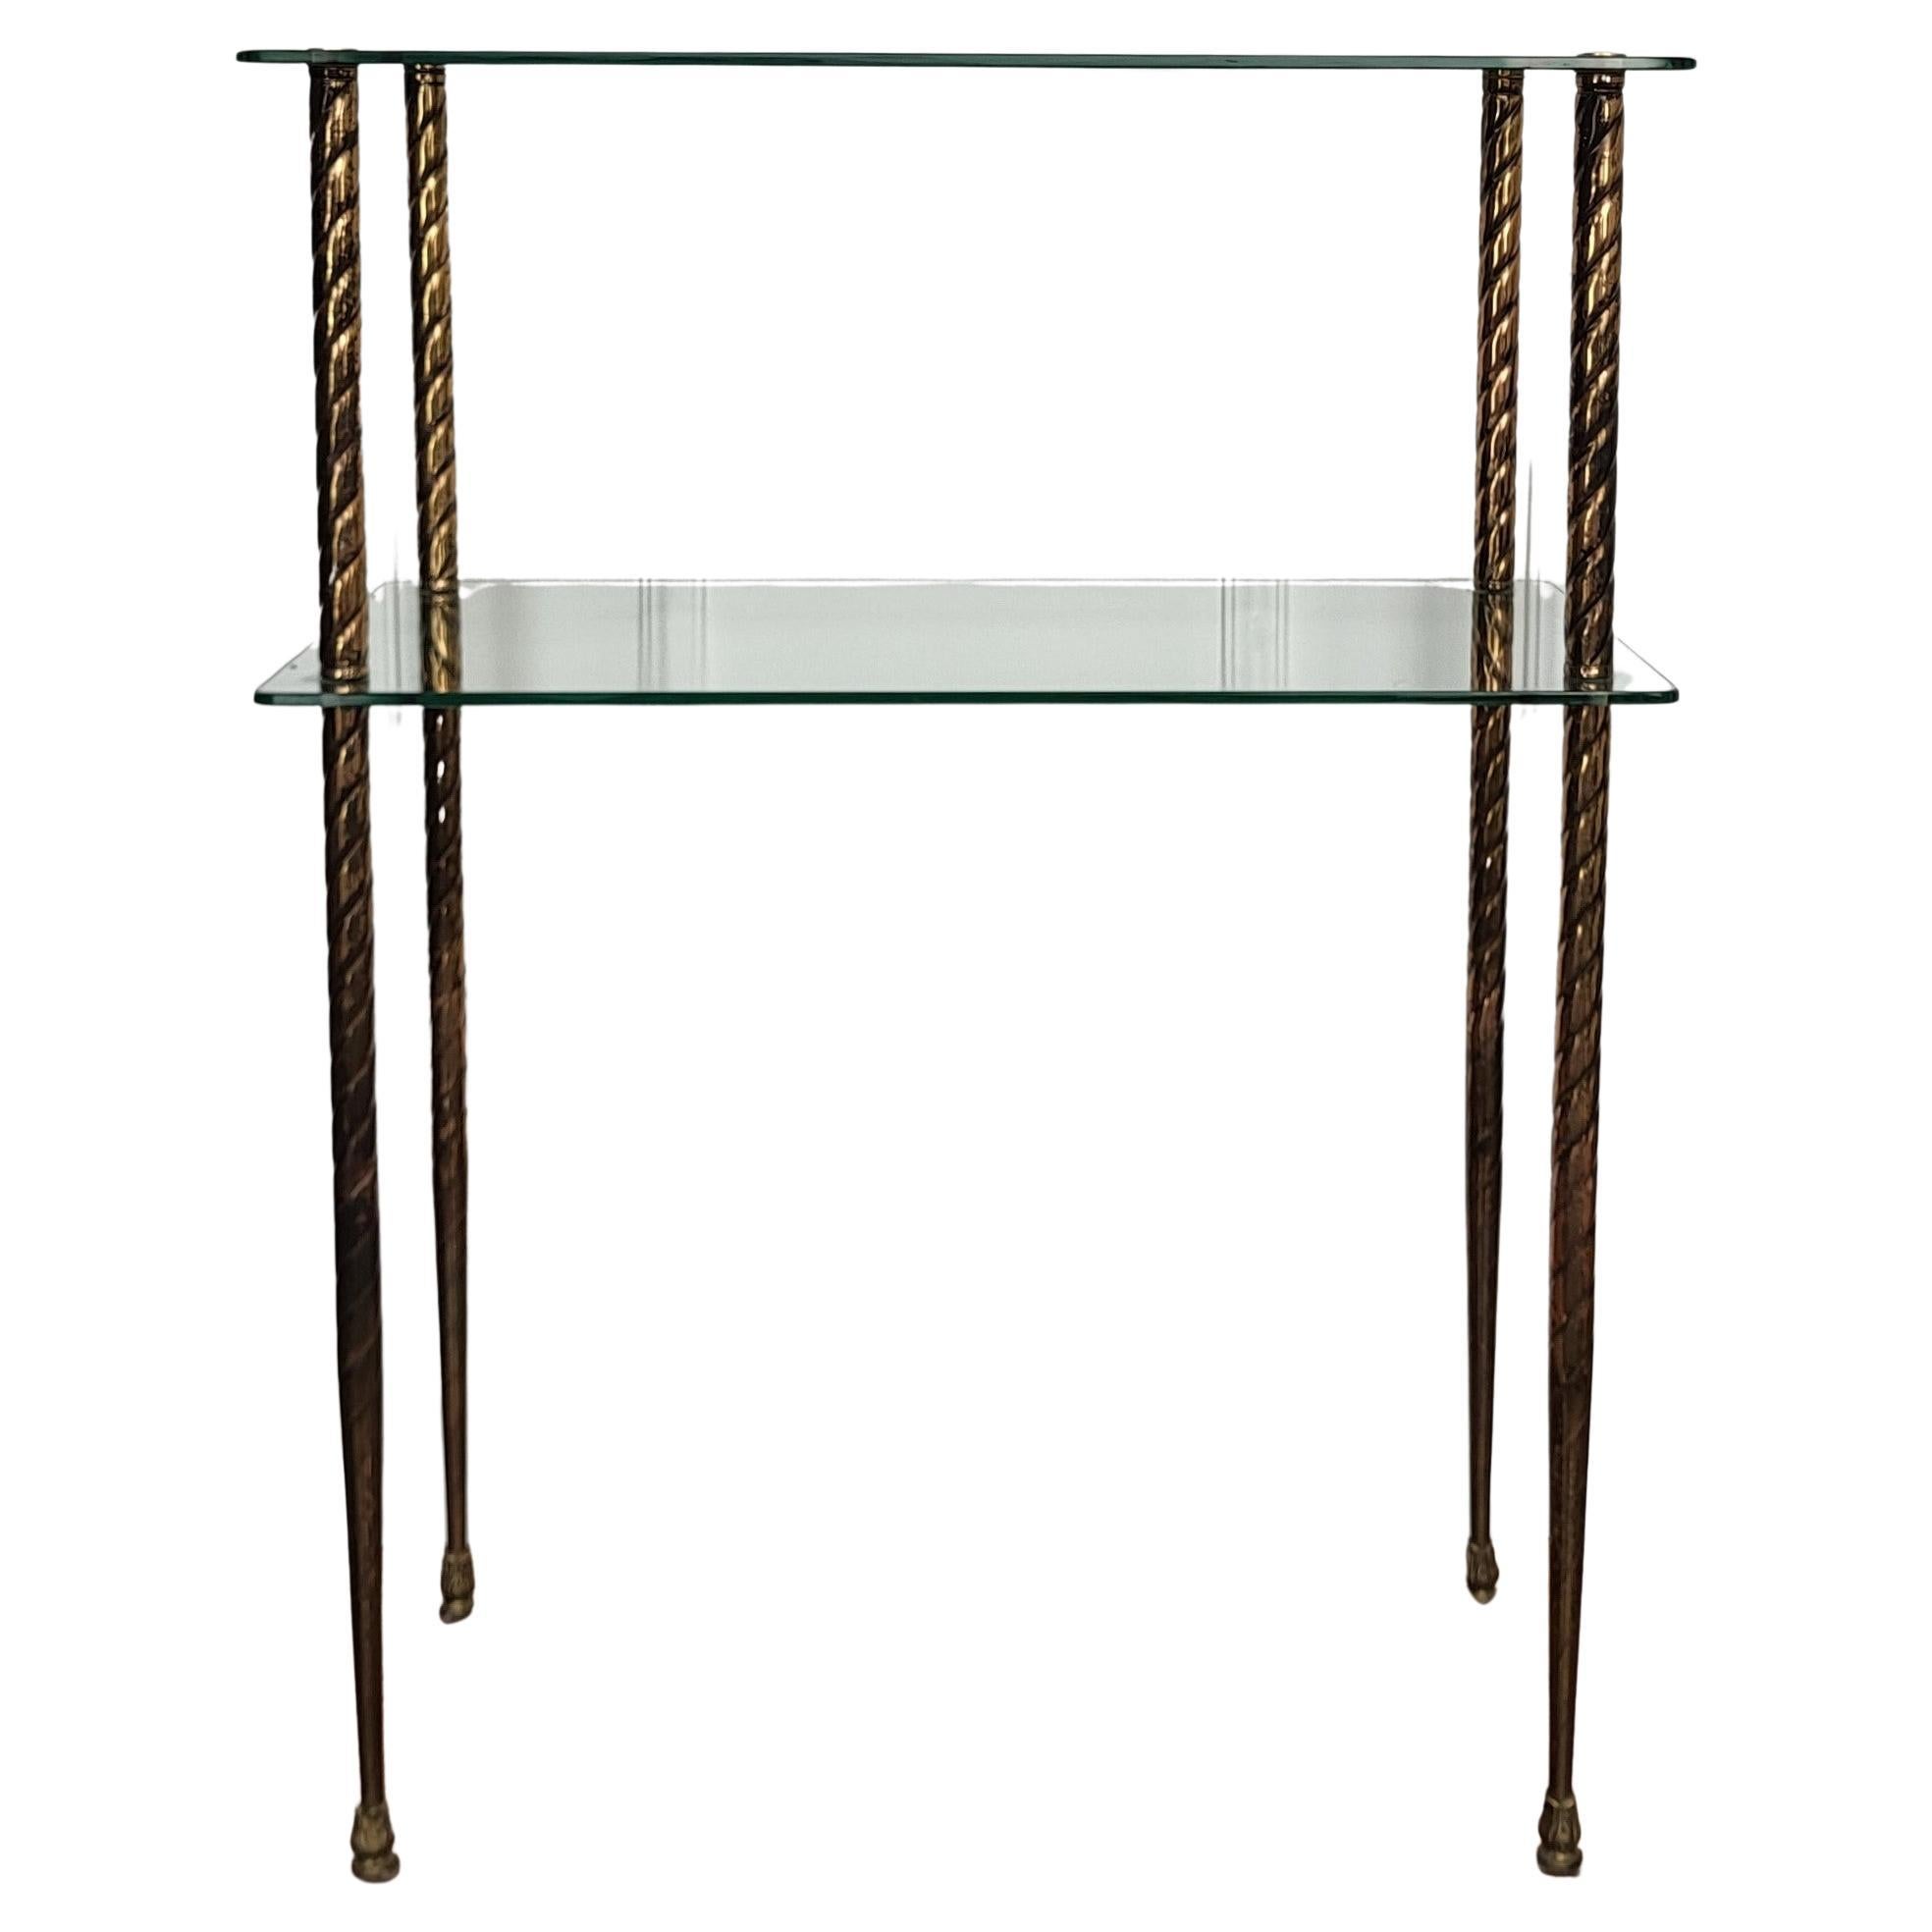 1980s Hollywood Regency Mid-Century Modern Brass Glass Etagere Console Table For Sale